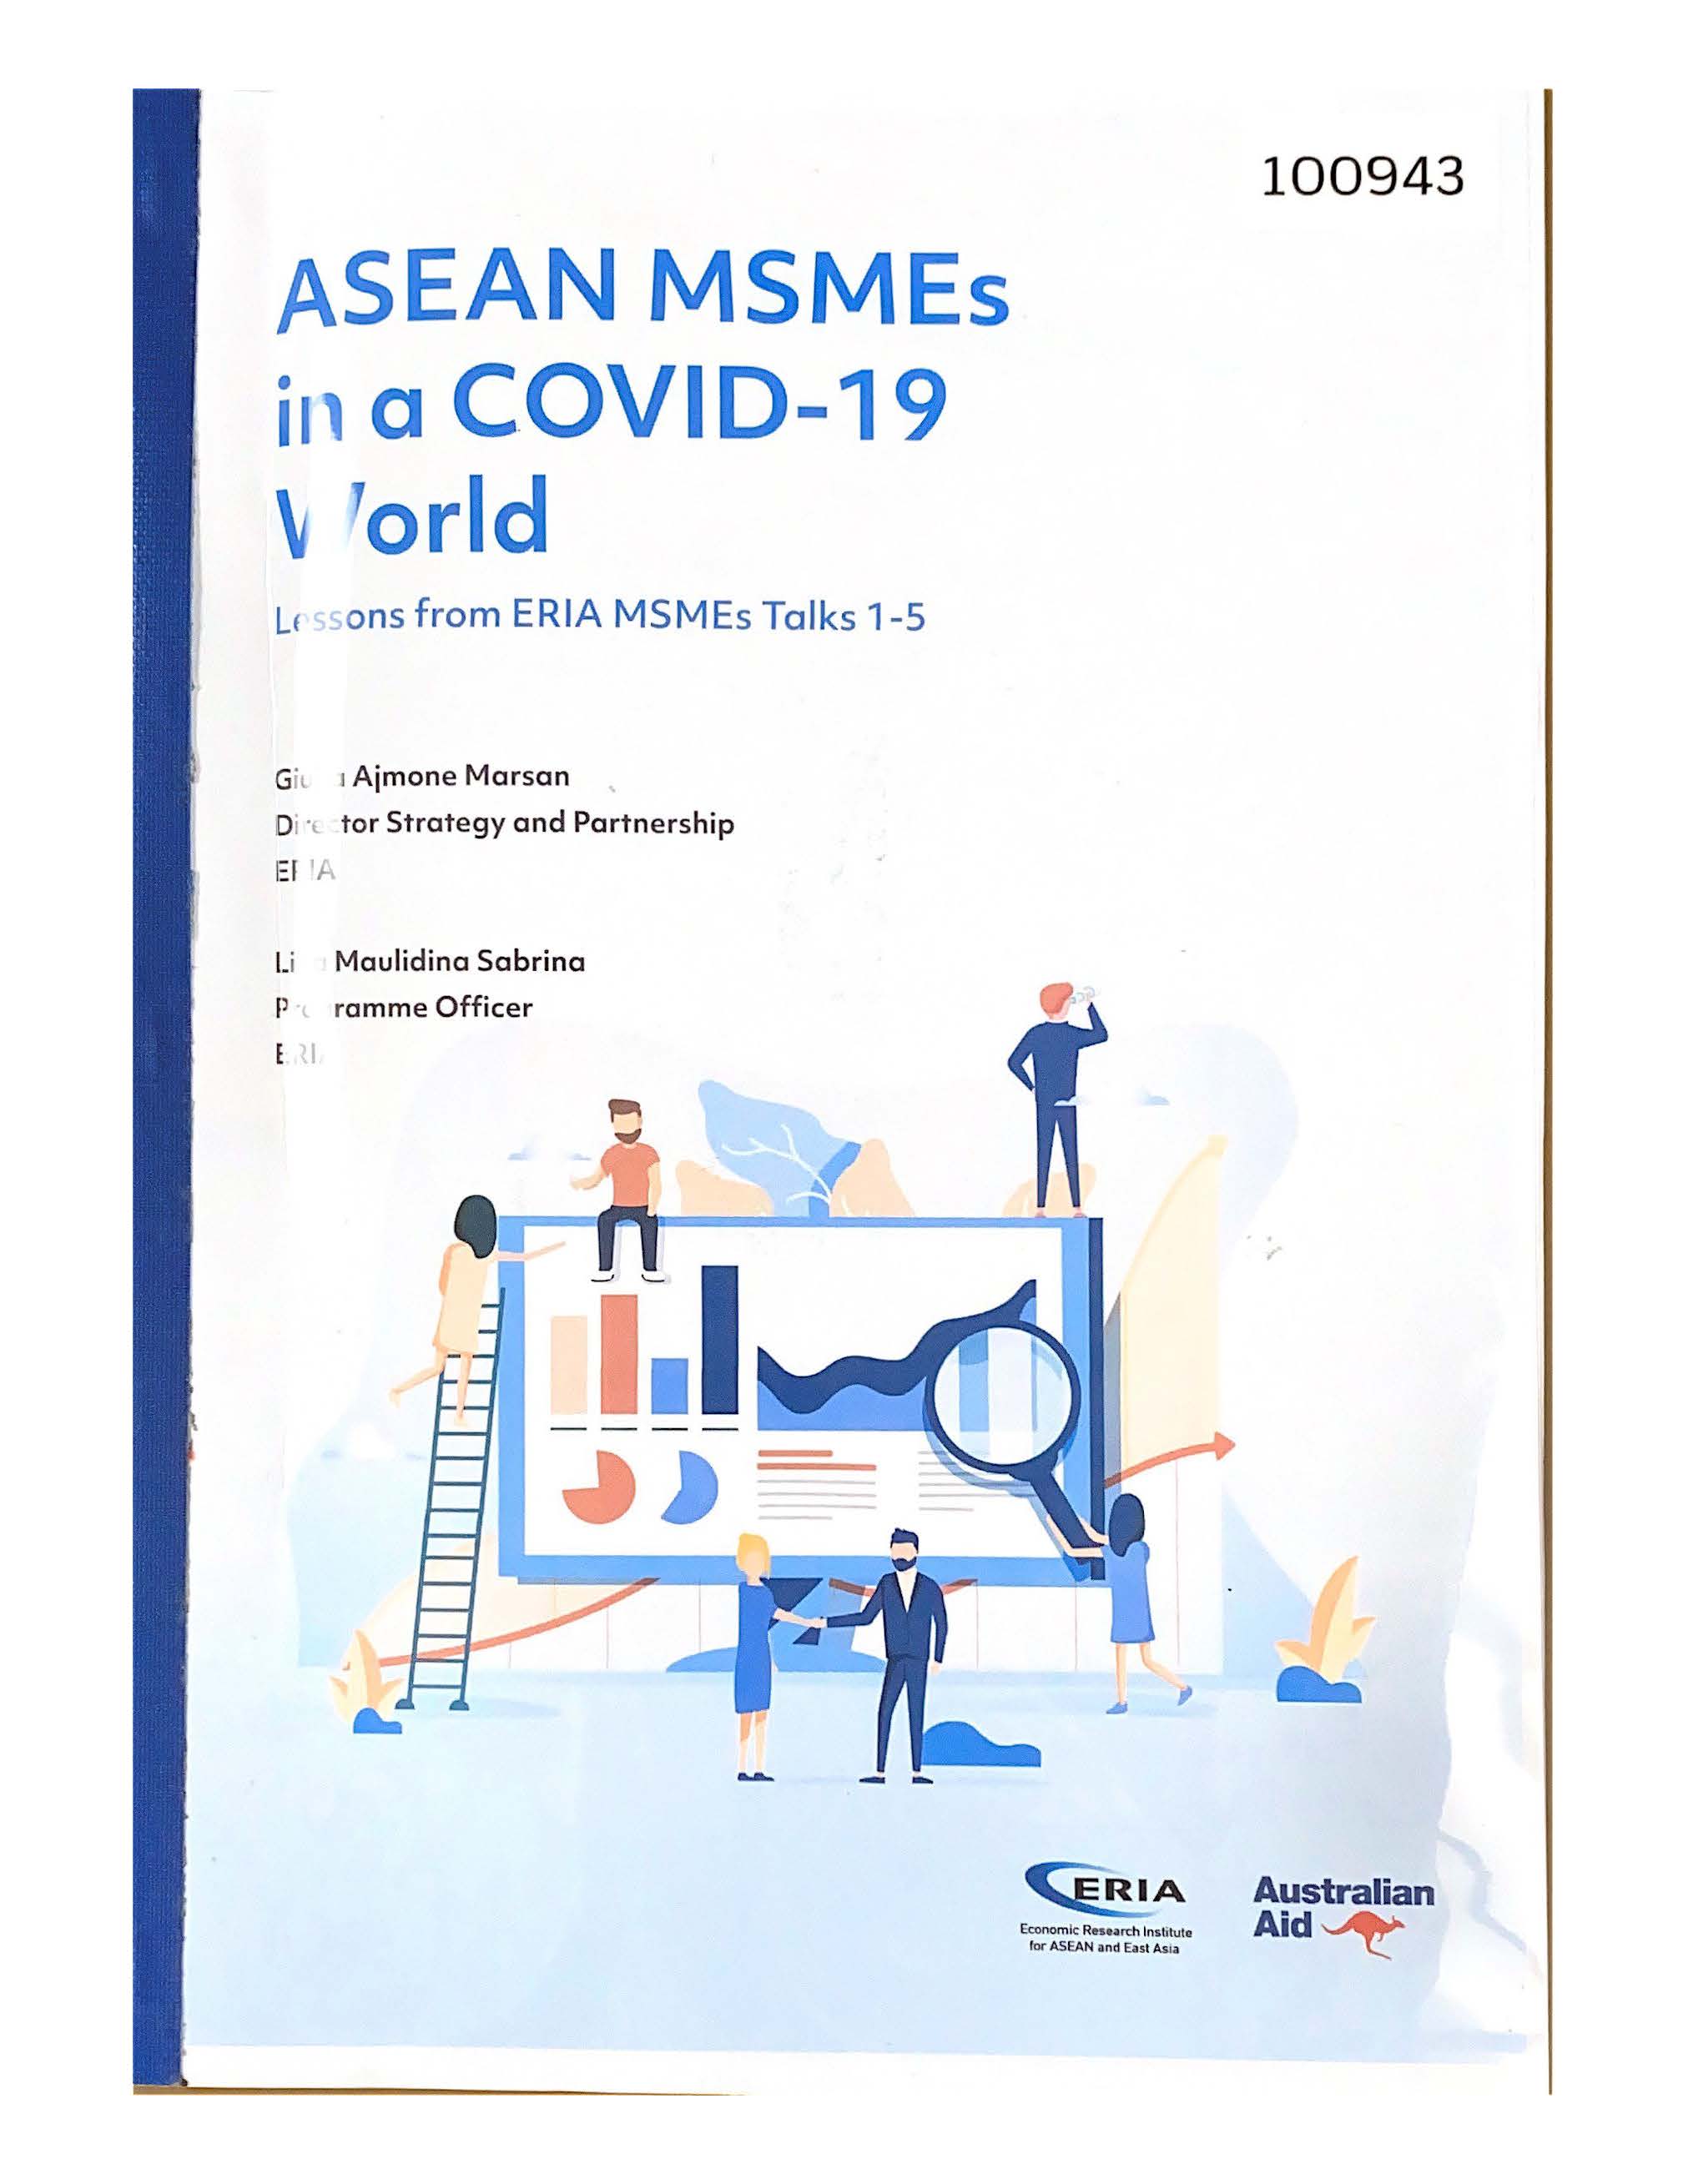 ASEAN MSMEs in a Covid-19 World